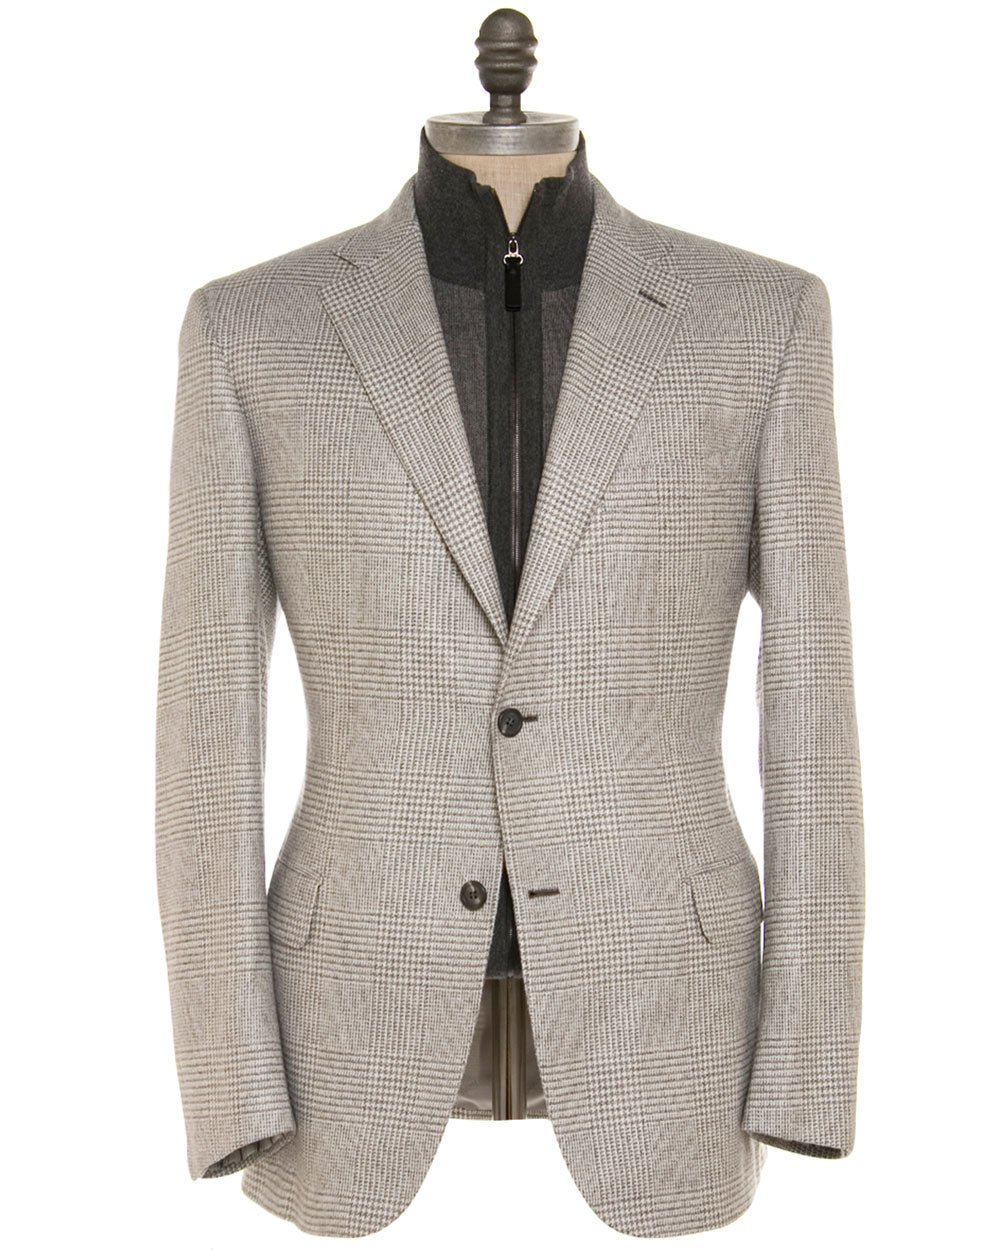 Grey and Ivory Glen Plaid Sportcoat